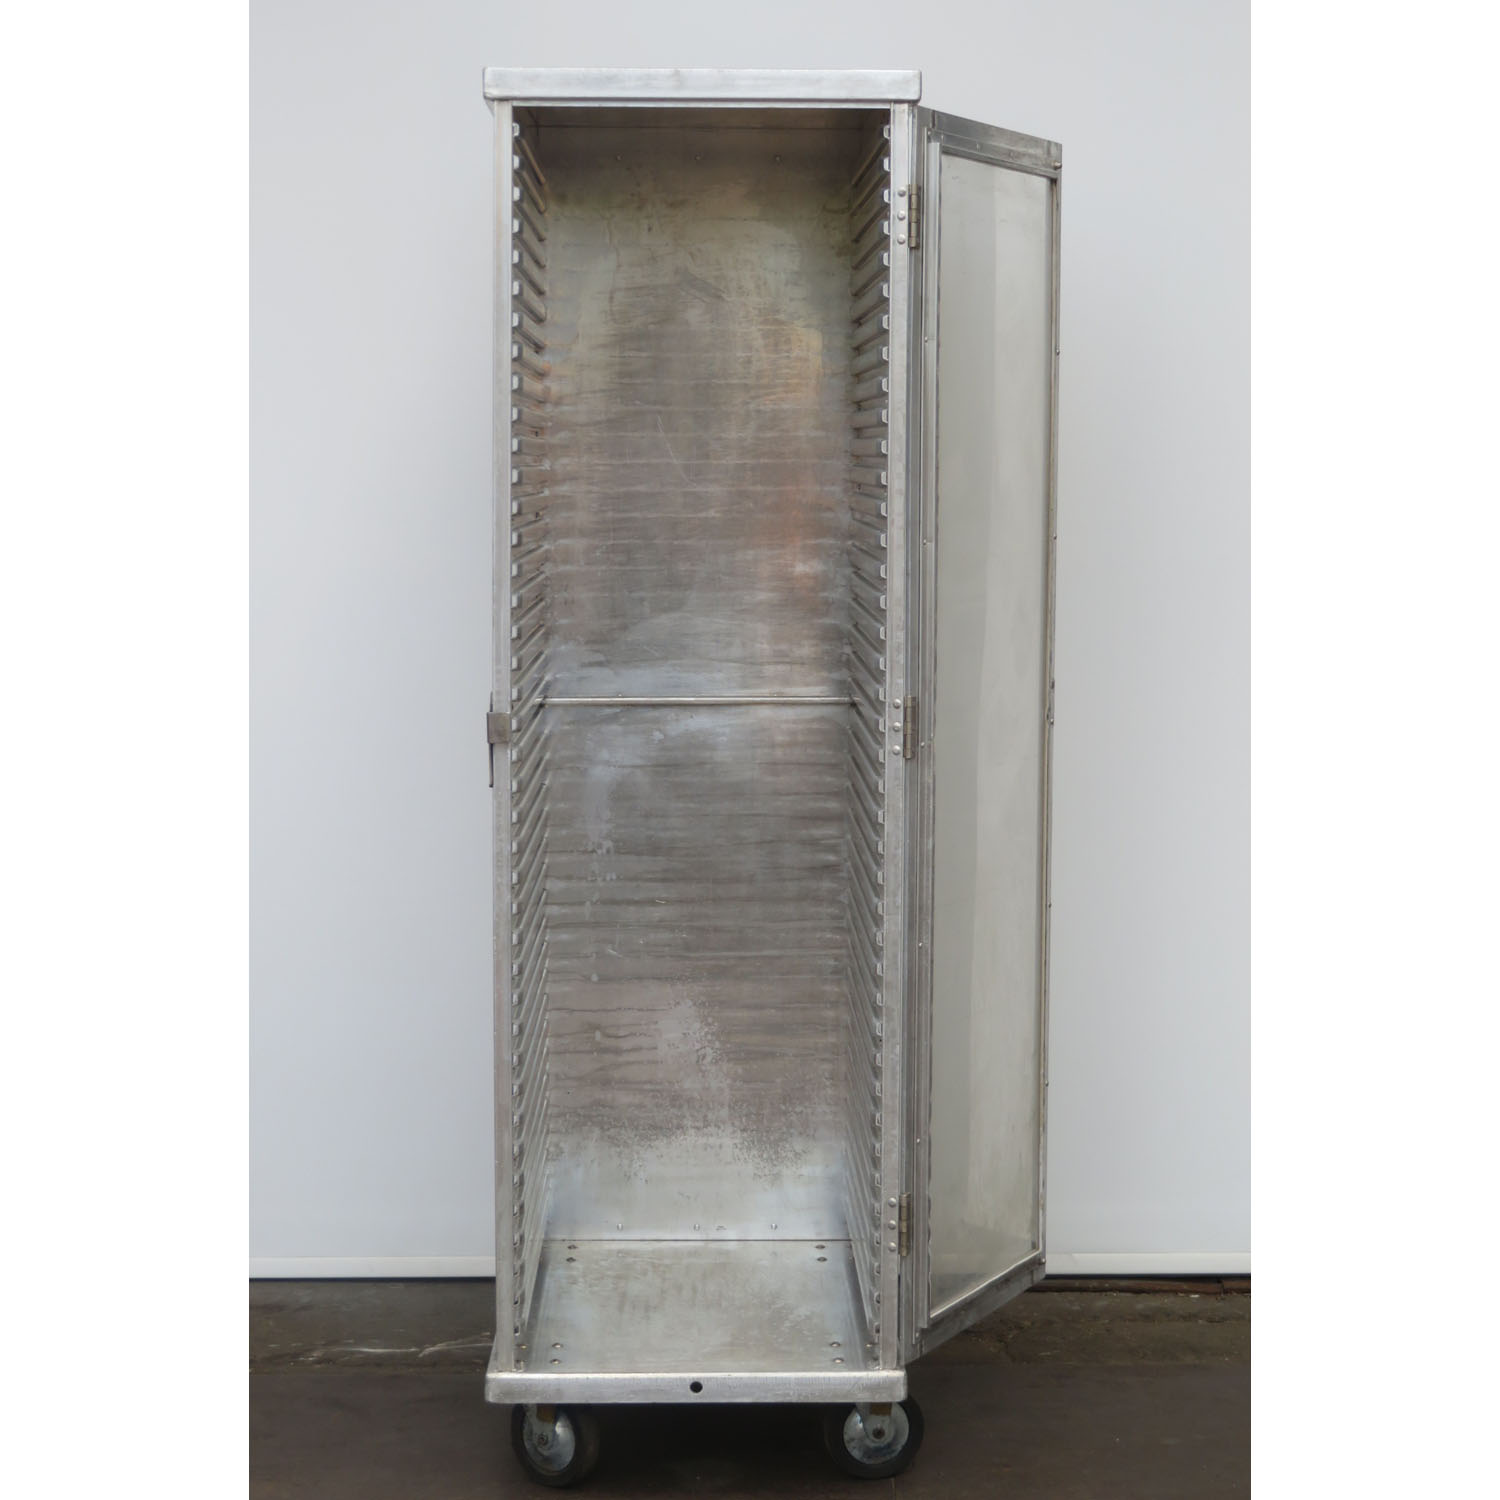 Cres Cor 100-1841D Enclosed Pan Rack Cabinet, Used Excellent Condition image 1